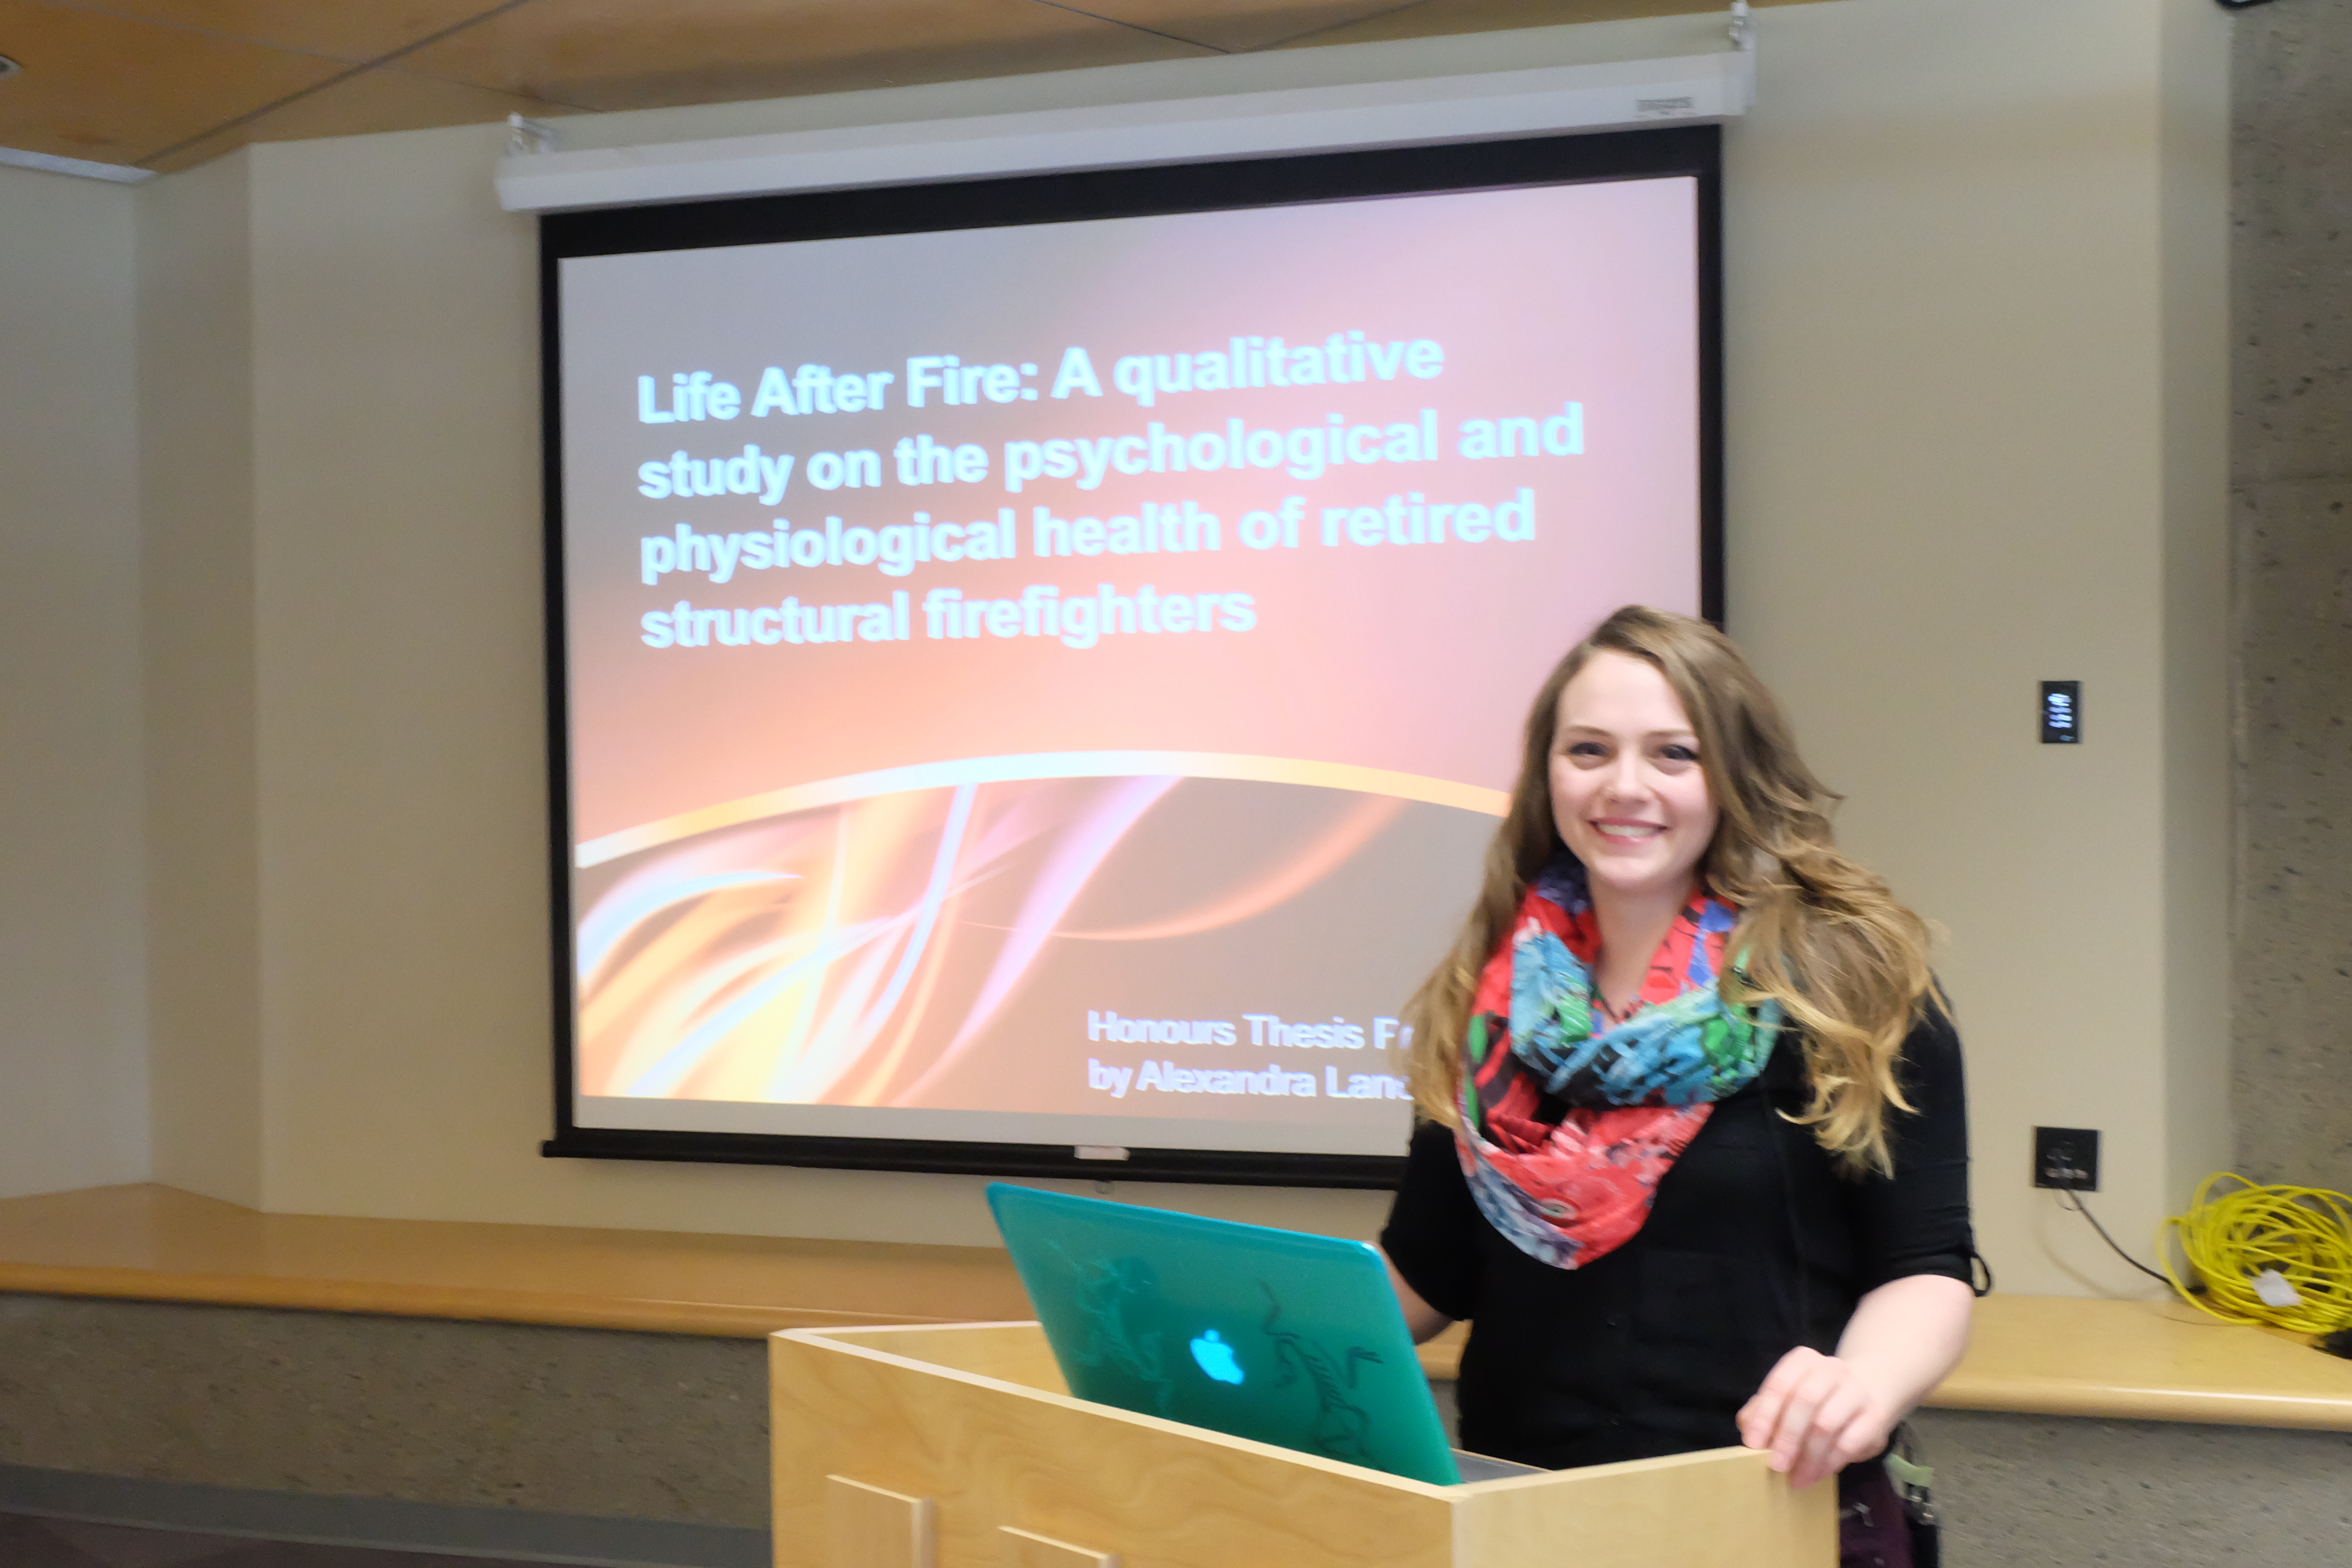 Alexandra Lane presentation 1: Life after fire: A qualitative study on the psychological and physiological health of retired structural firefighters